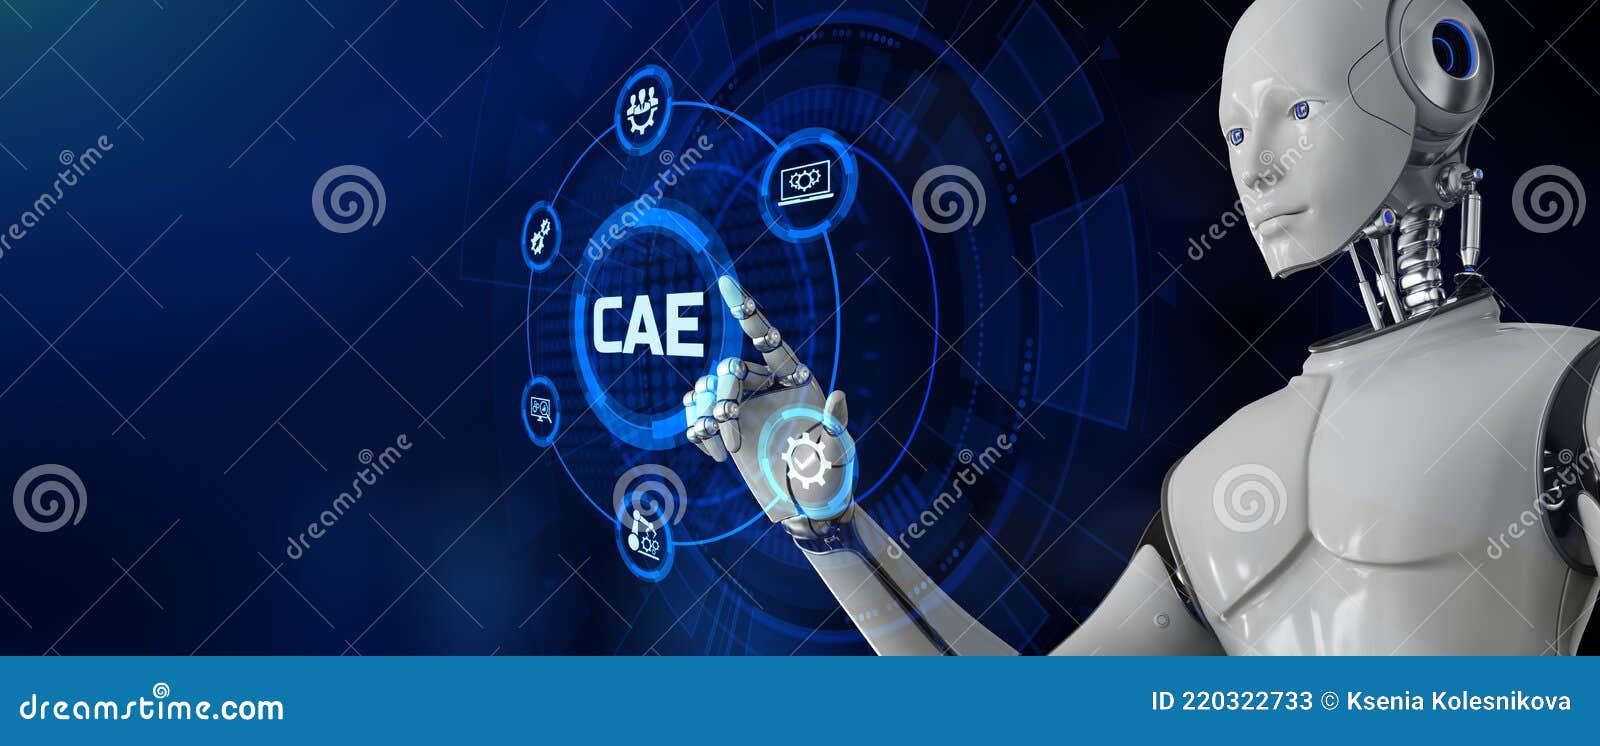 cae computer-aided engineering software system. technology concept. robot pressing button on screen 3d render